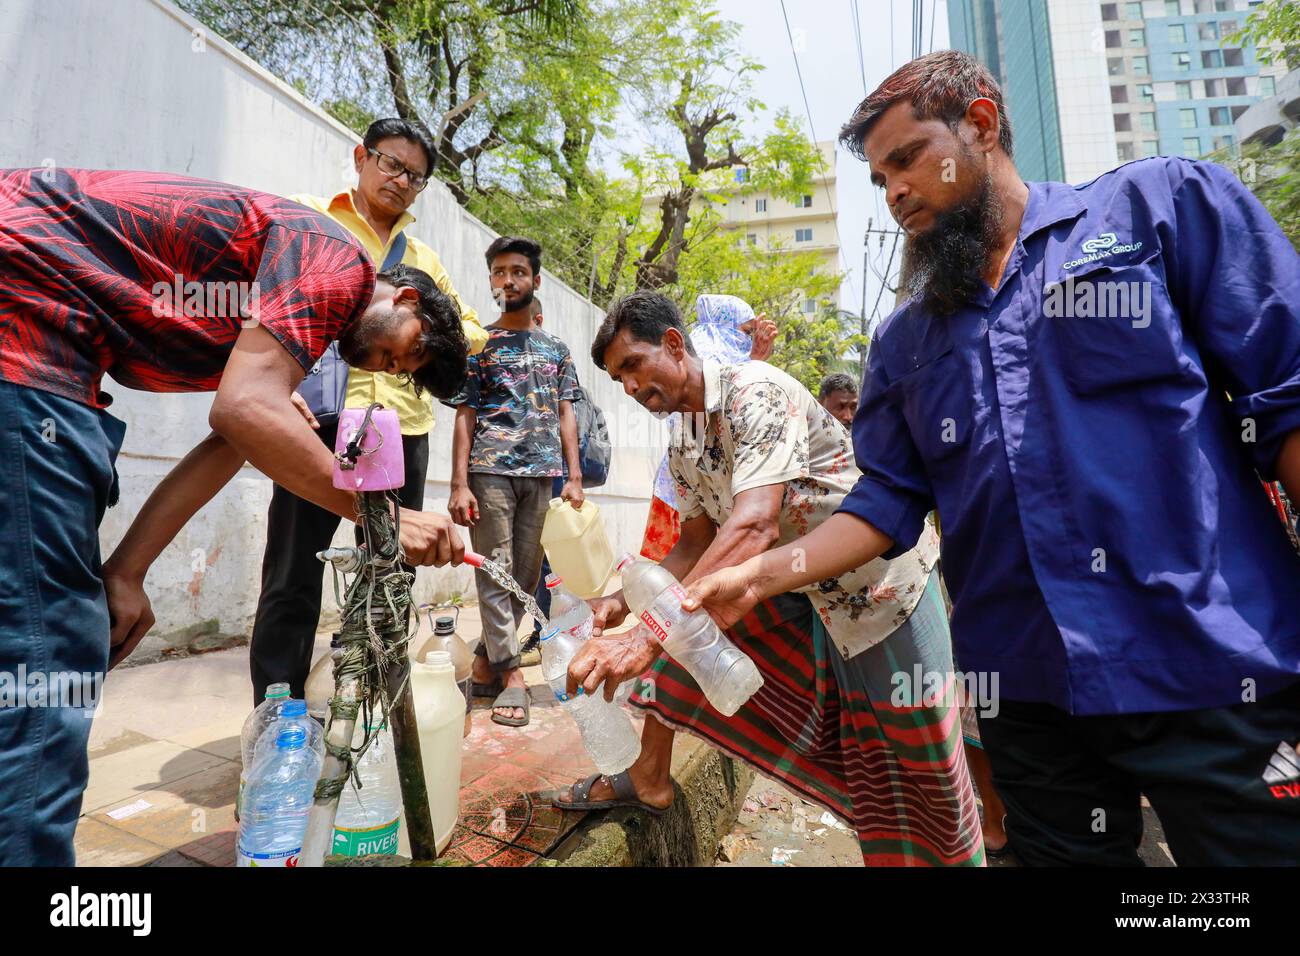 Dhaka, Bangladesh. 22nd Apr, 2024. During the hot summer day Bangladeshi people collect drinking water from a street side water supply, in Dhaka, Bangladesh, April 22, 2024. The country's capital, Dhaka, saw the temperature reach 40.6Â° Celsius (105.1Â° Fahrenheit) on April 16, the highest in 58 years, making people's lives unbearable for more than a week with low humidity in the air, according to Bangladesh Meteorological Department (BMD) officials. Five types of gas layers have been created in Dhaka's air. These gases have been produced from garbage dumps, brick kilns, vehicles and the Stock Photo